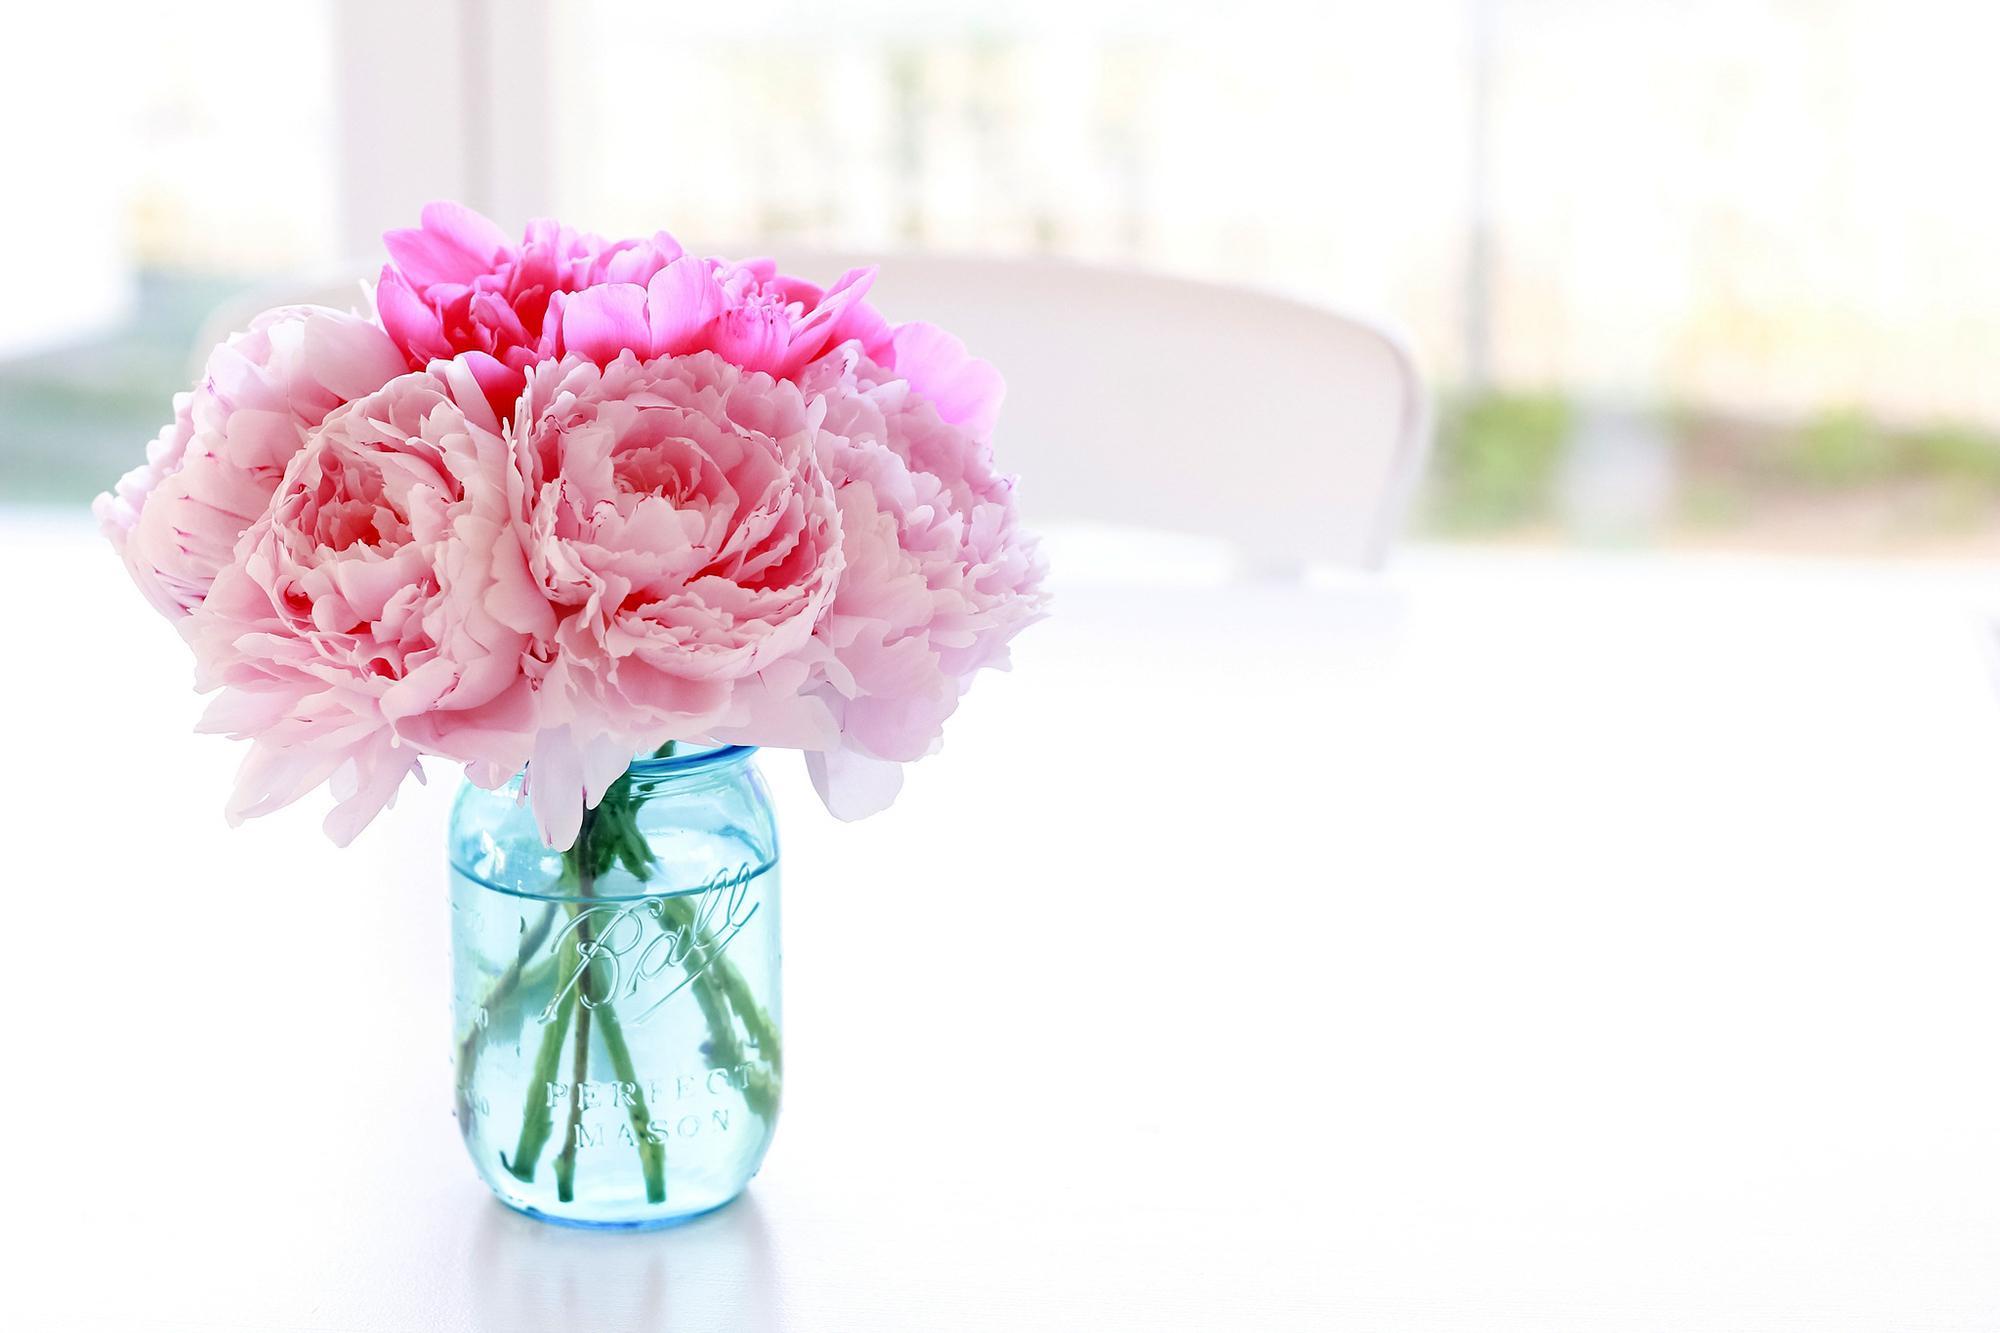 Peony Bouquet HD Wallpaper, Background Image